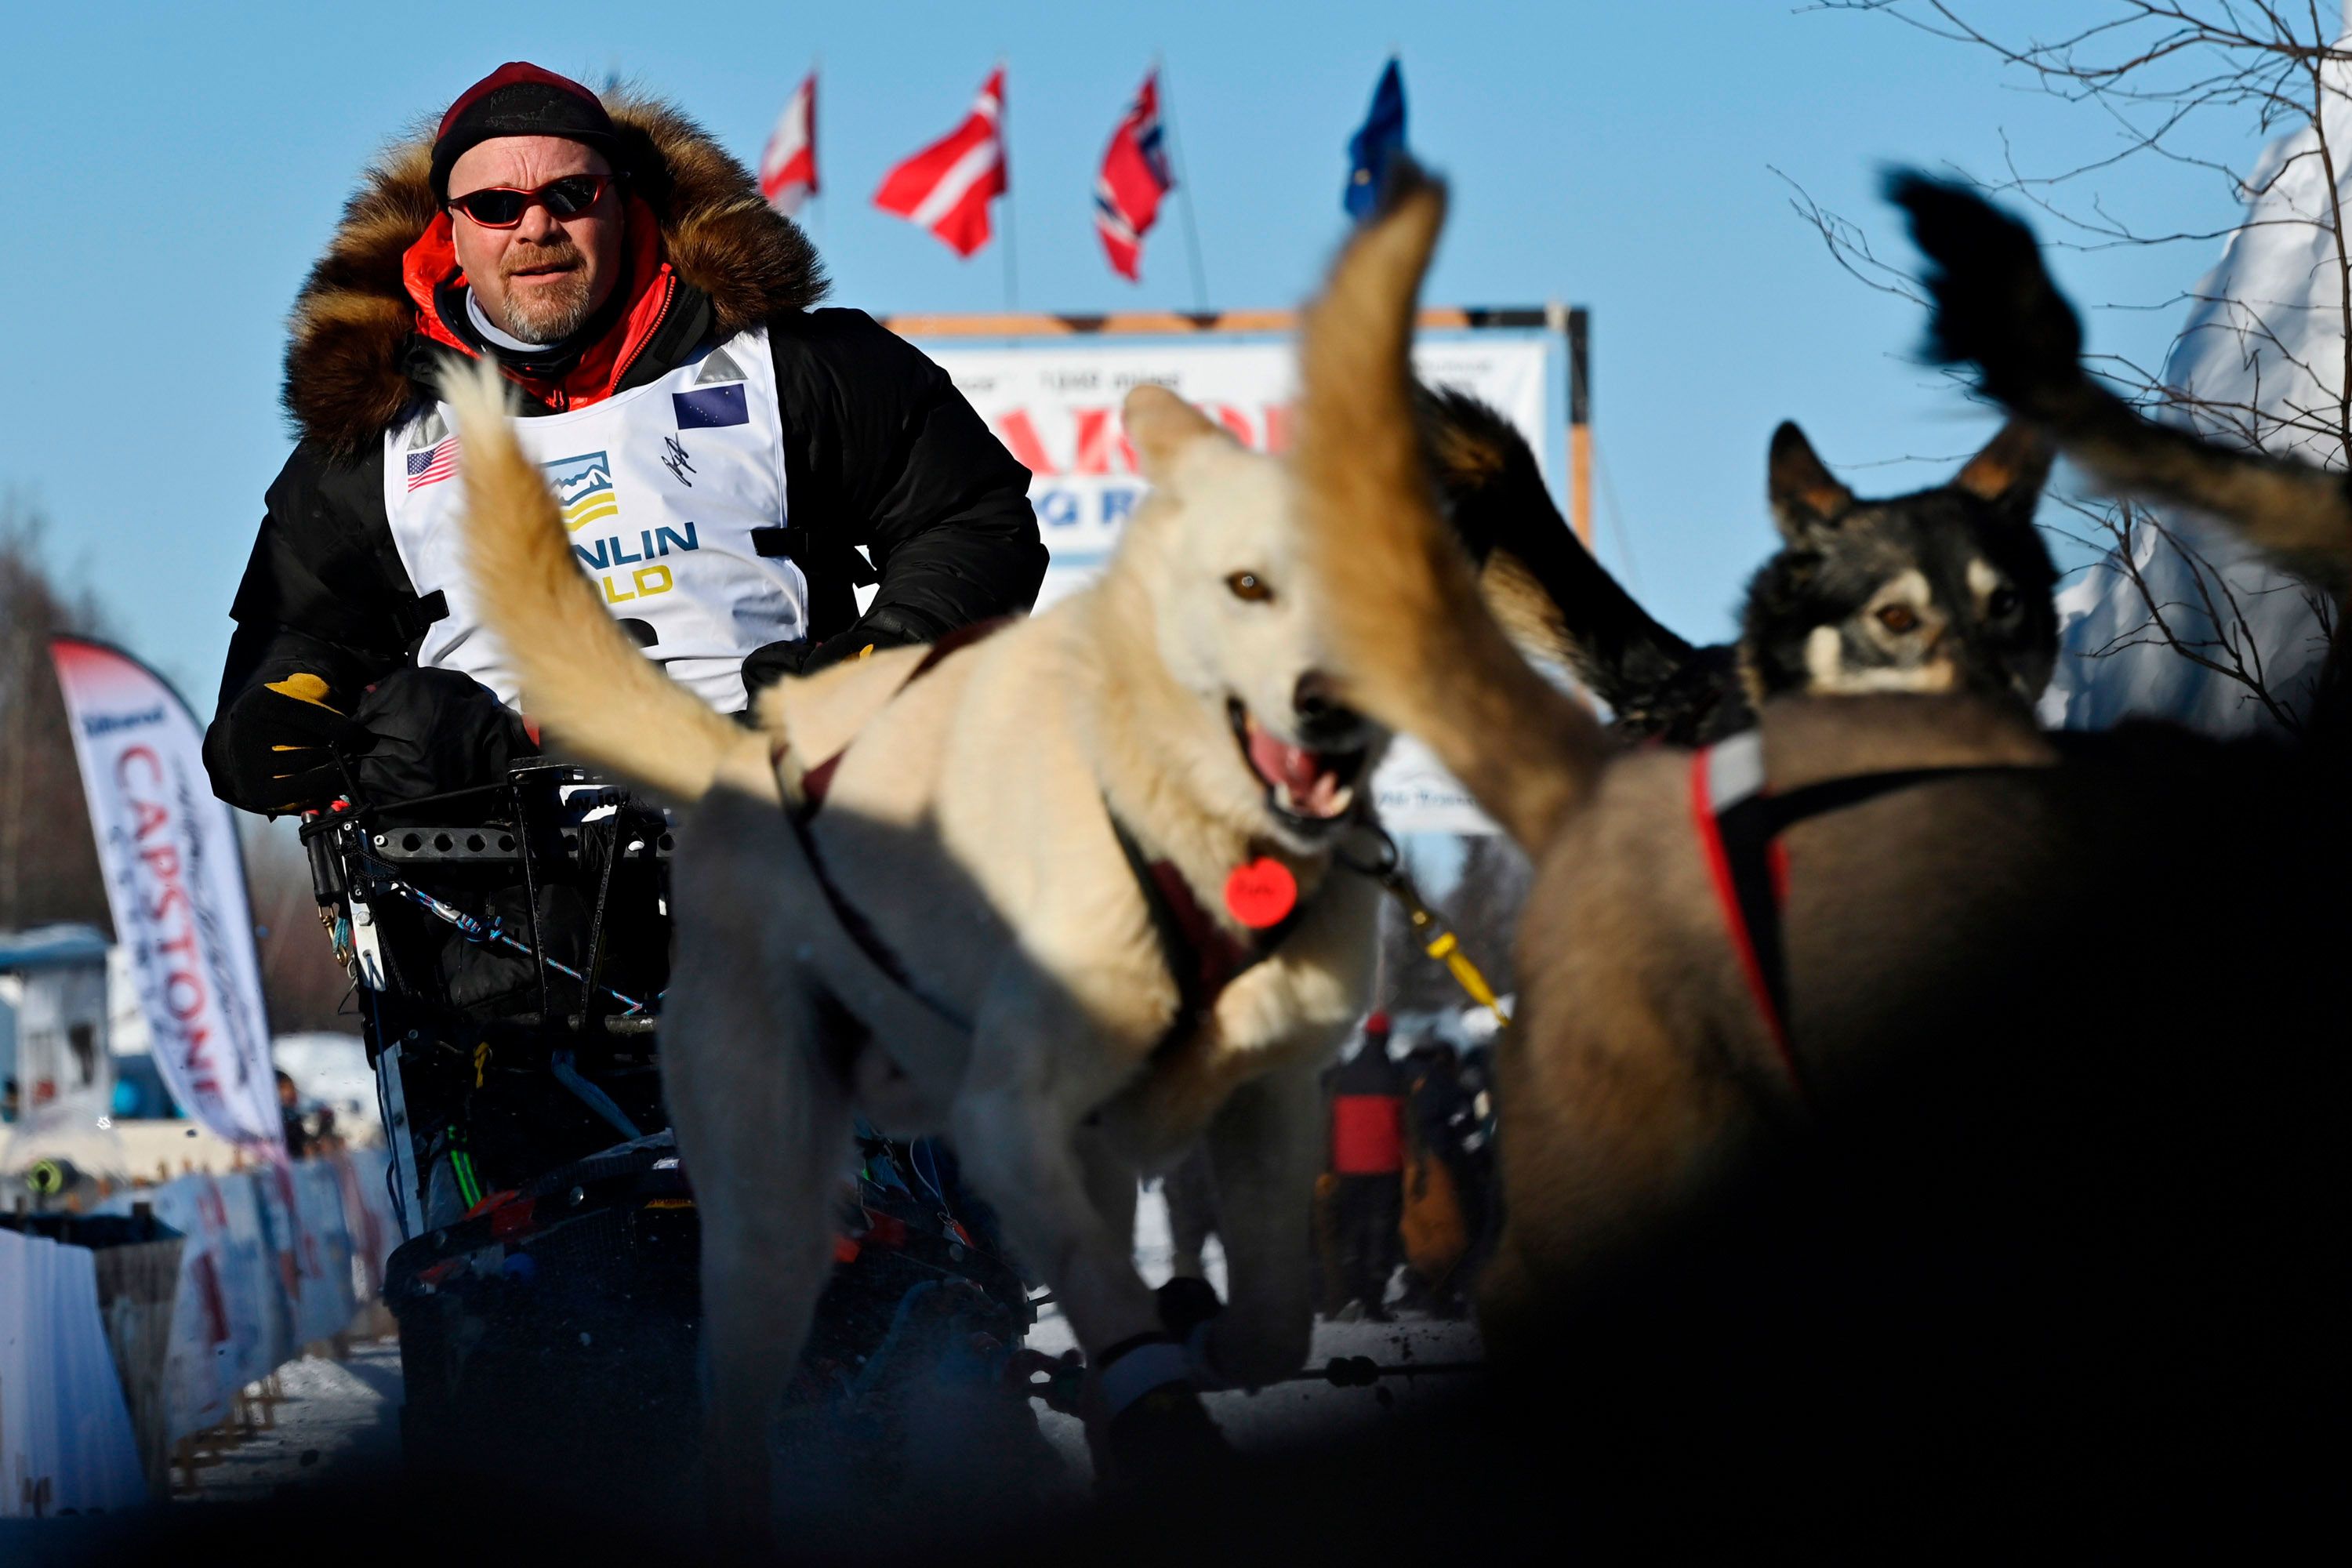 Aaron Burmeister and his team of dogs leave the Iditarod starting area in Willow, Alaska, on Sunday, March 7.